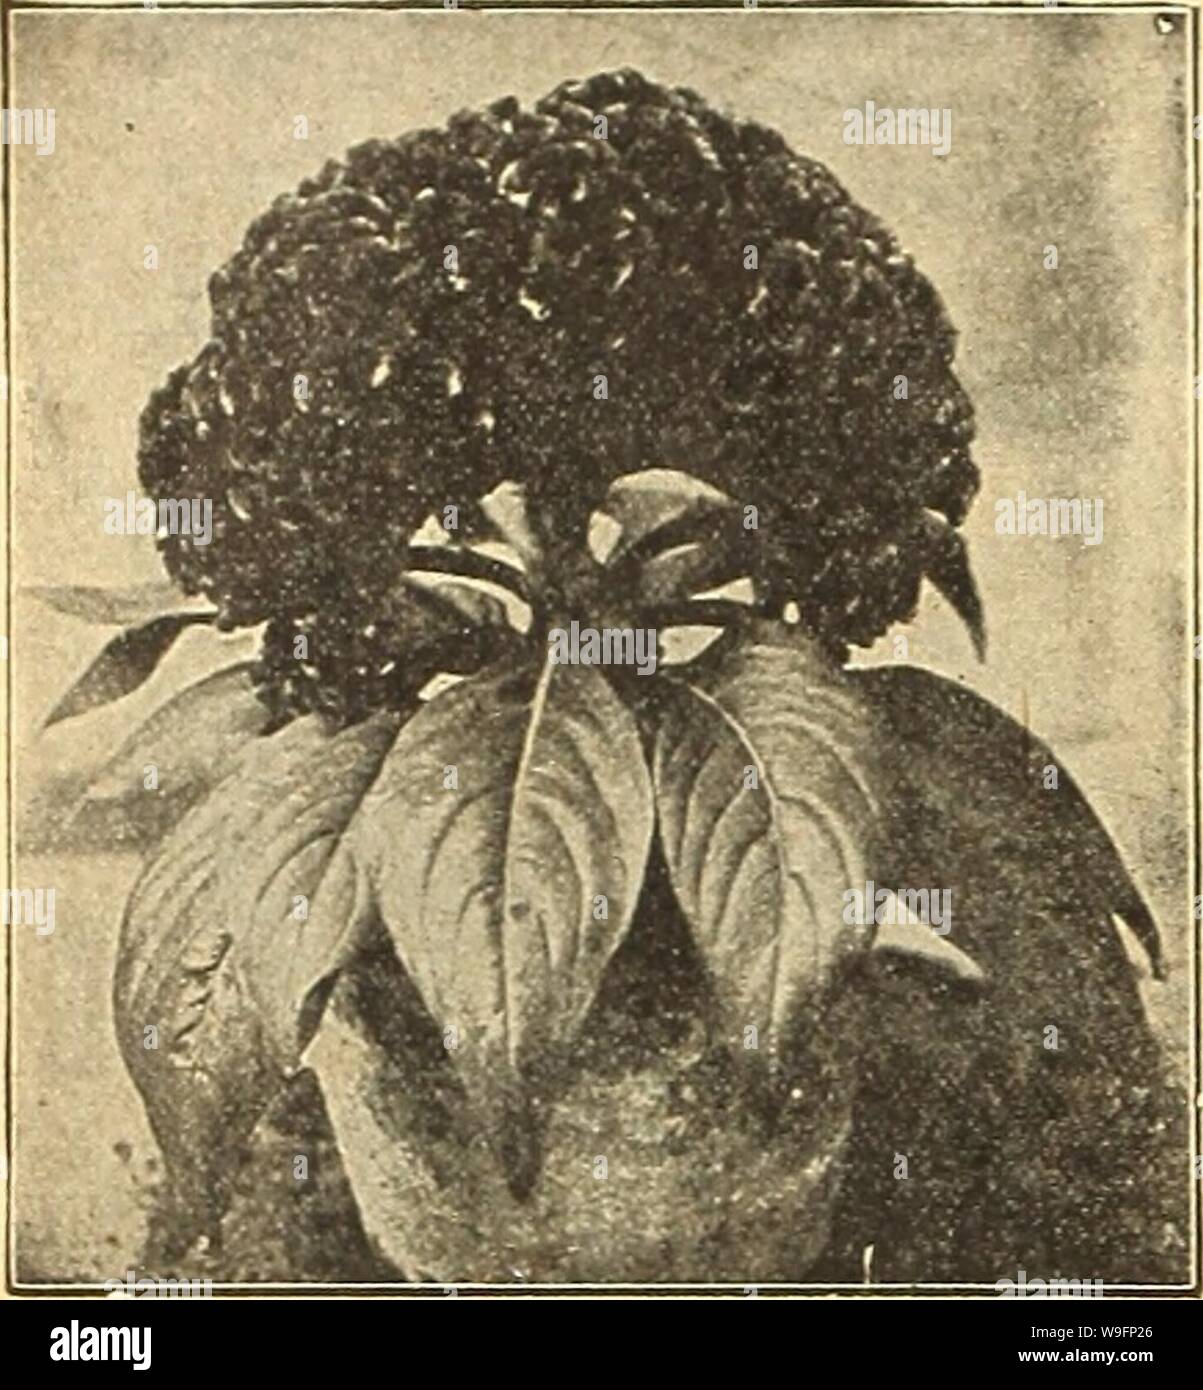 Archive image from page 59 of Currie's farm and garden annual. Currie's farm and garden annual : spring 1918 43rd year  curriesfarmgarde19curr 1 Year: 1918 ( 54 CURRIE'BROTHERS COMPANY, MILWAUKEE, WIS. CELOSIA OR COCKSCOMB Interesting and brilliant annuals o{ tropical origin. The feathered varieties bear profusely handsome spikes of feather-like blossoms, while the Cristata sorts are finely cut so as to resemble a cockscomb. H. H. A. Pkt. Glasgow Prize—A beautiful variety with very large crimson combs 10 Cristata Aurea—Dwarf yellow 5 Cristata Coccinea—Dwarf crimson 6 Cristata Rosea—Dwarf rose Stock Photo